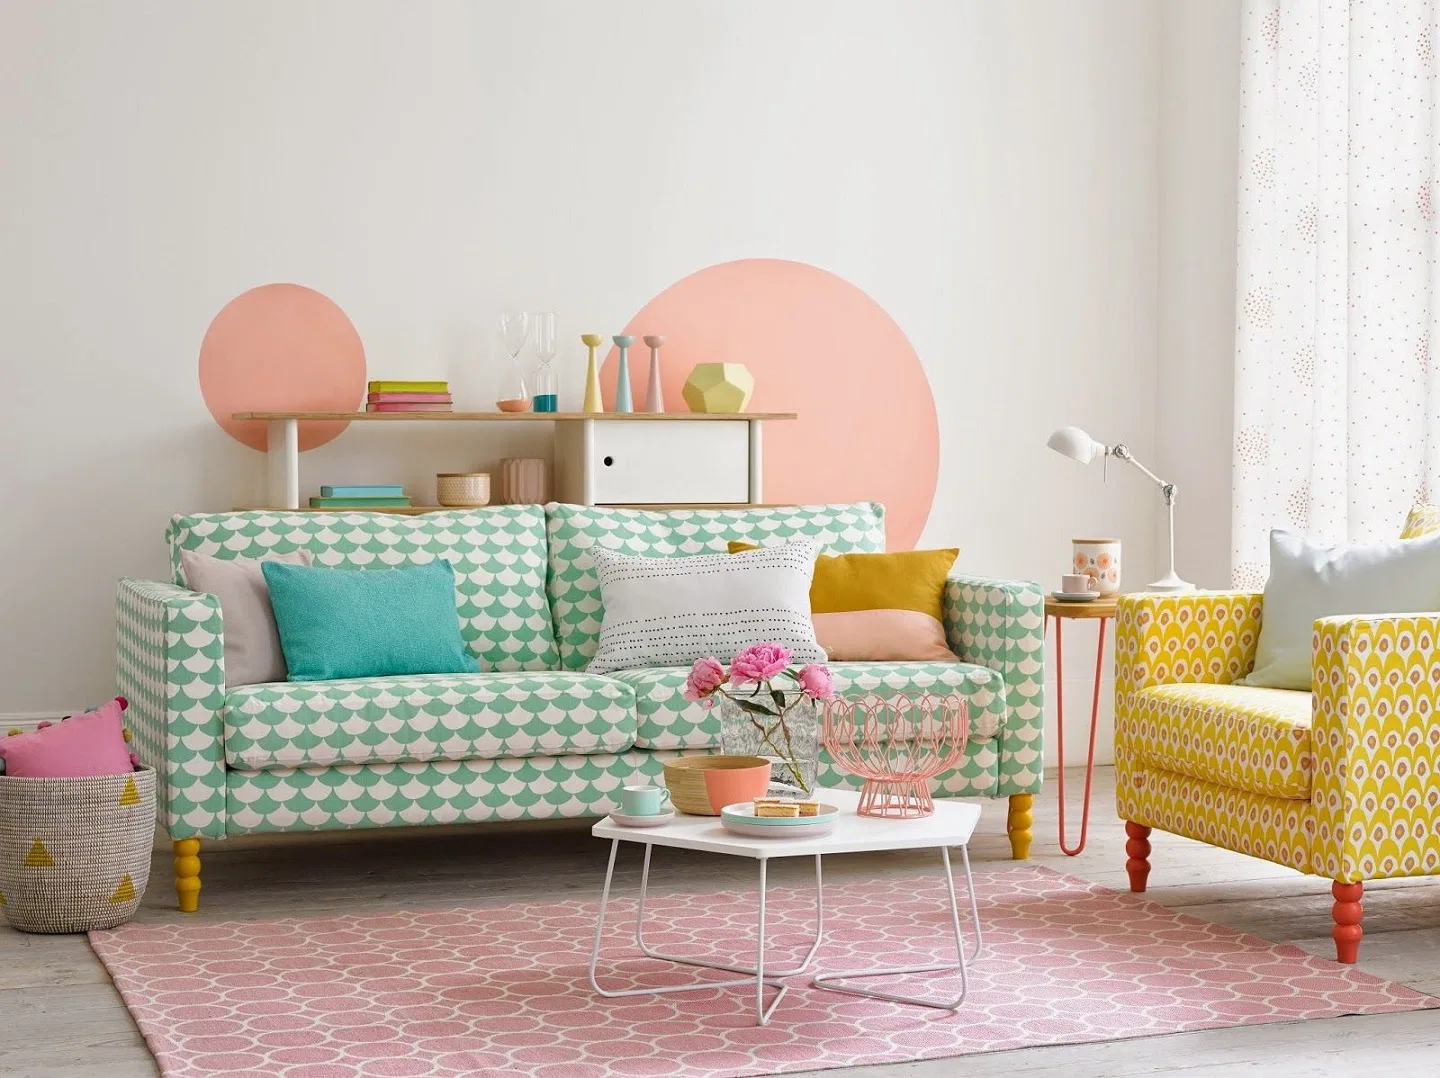 16 Best Striking Color Combinations to Transform Your Home Interior Design